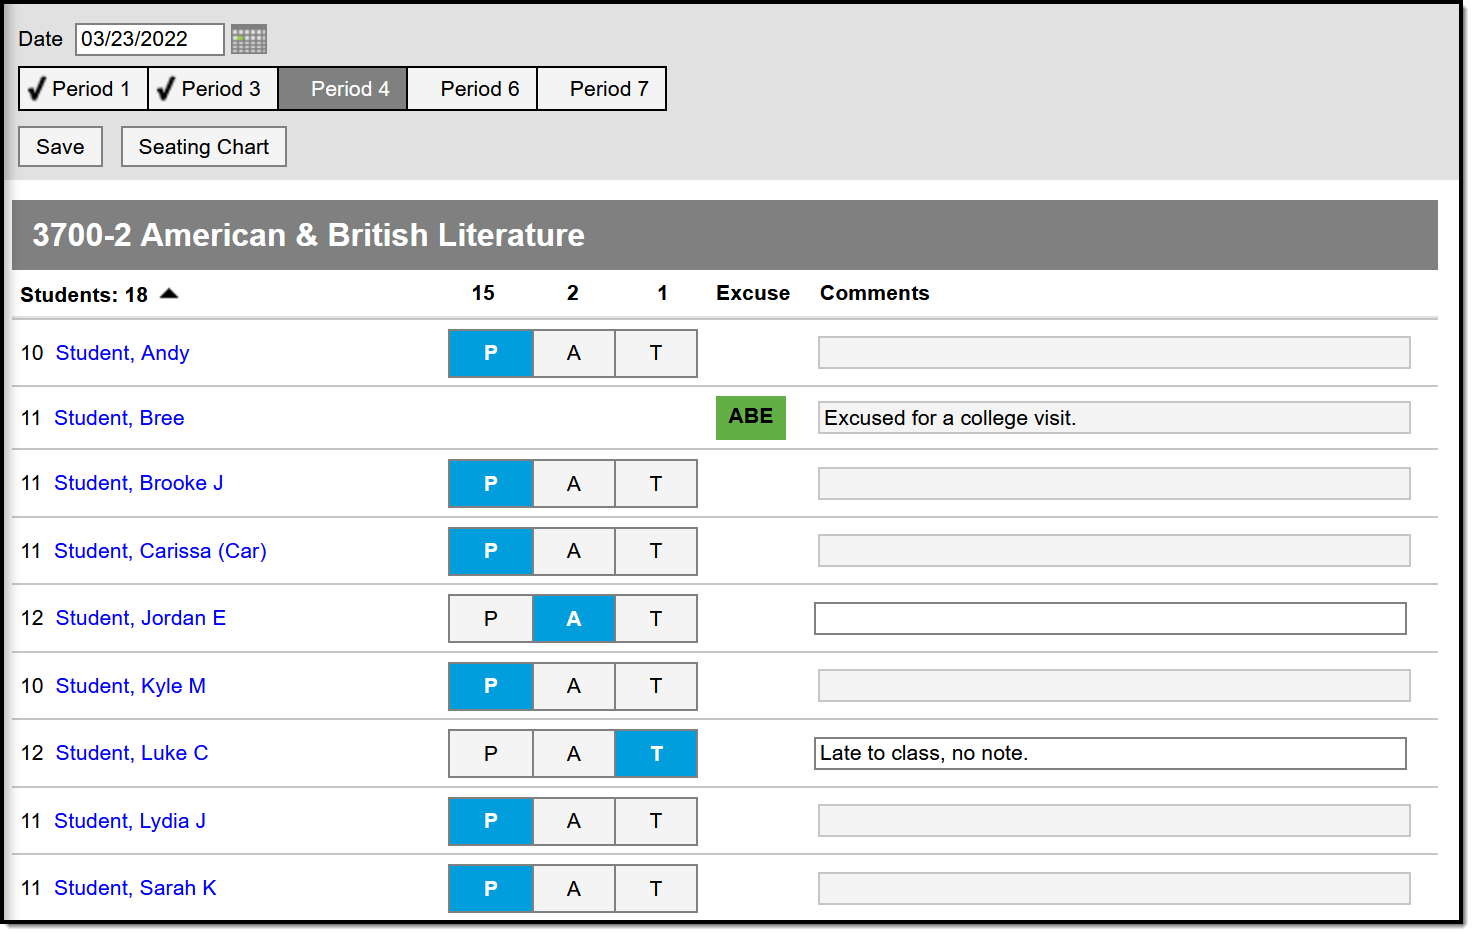 Screenshot of the attendance tool, with periods listed along the top and students listed by section, with P/A/T indicators for each and comments.